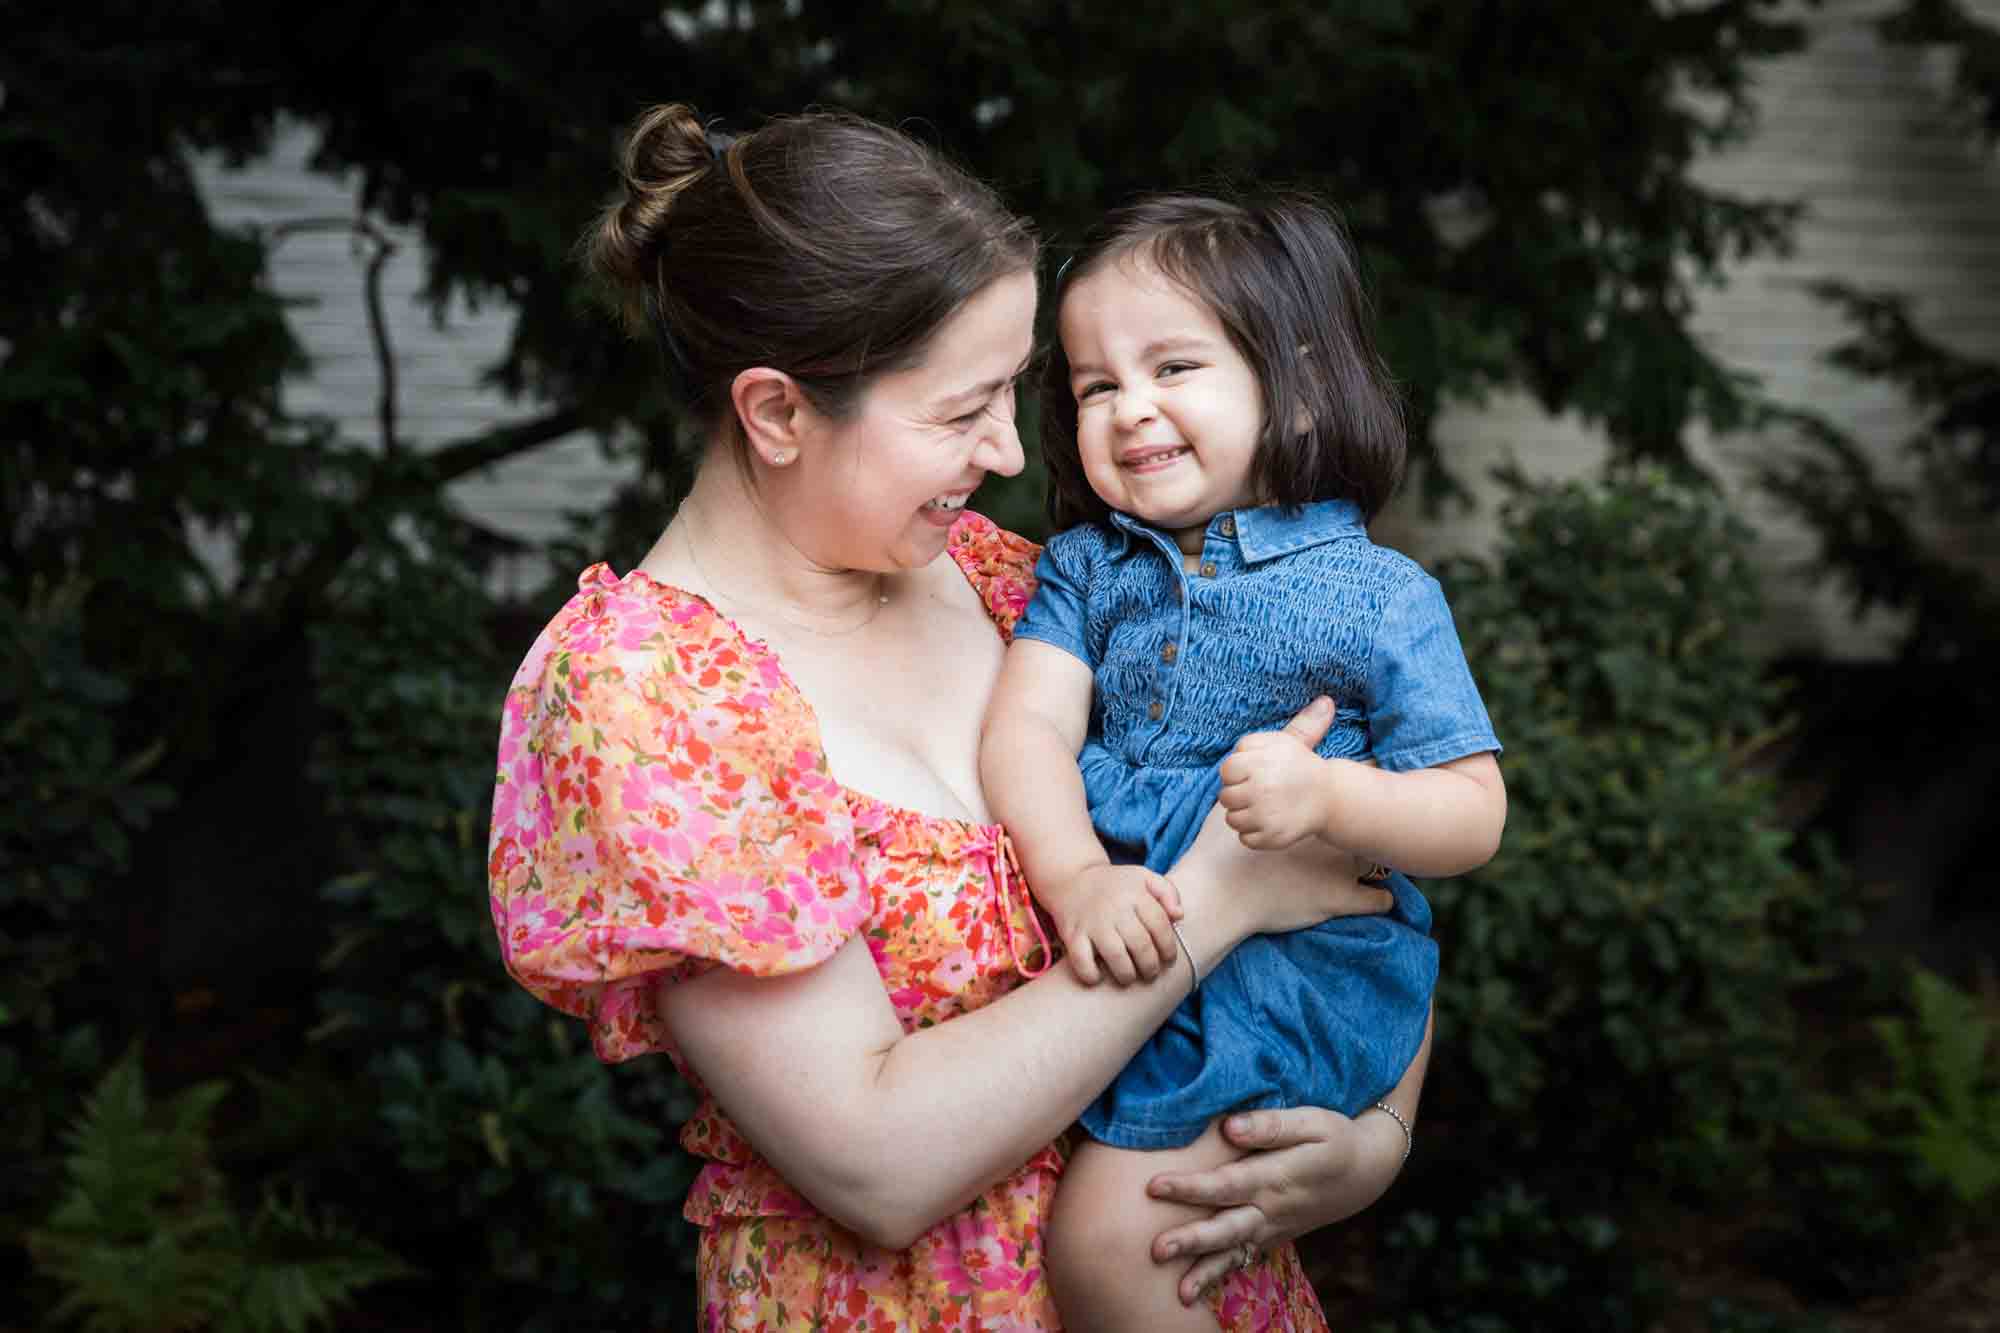 Mother in floral dress holding little girl in blue dress in front of vine-covered wall during a Brooklyn Commons family portrait session